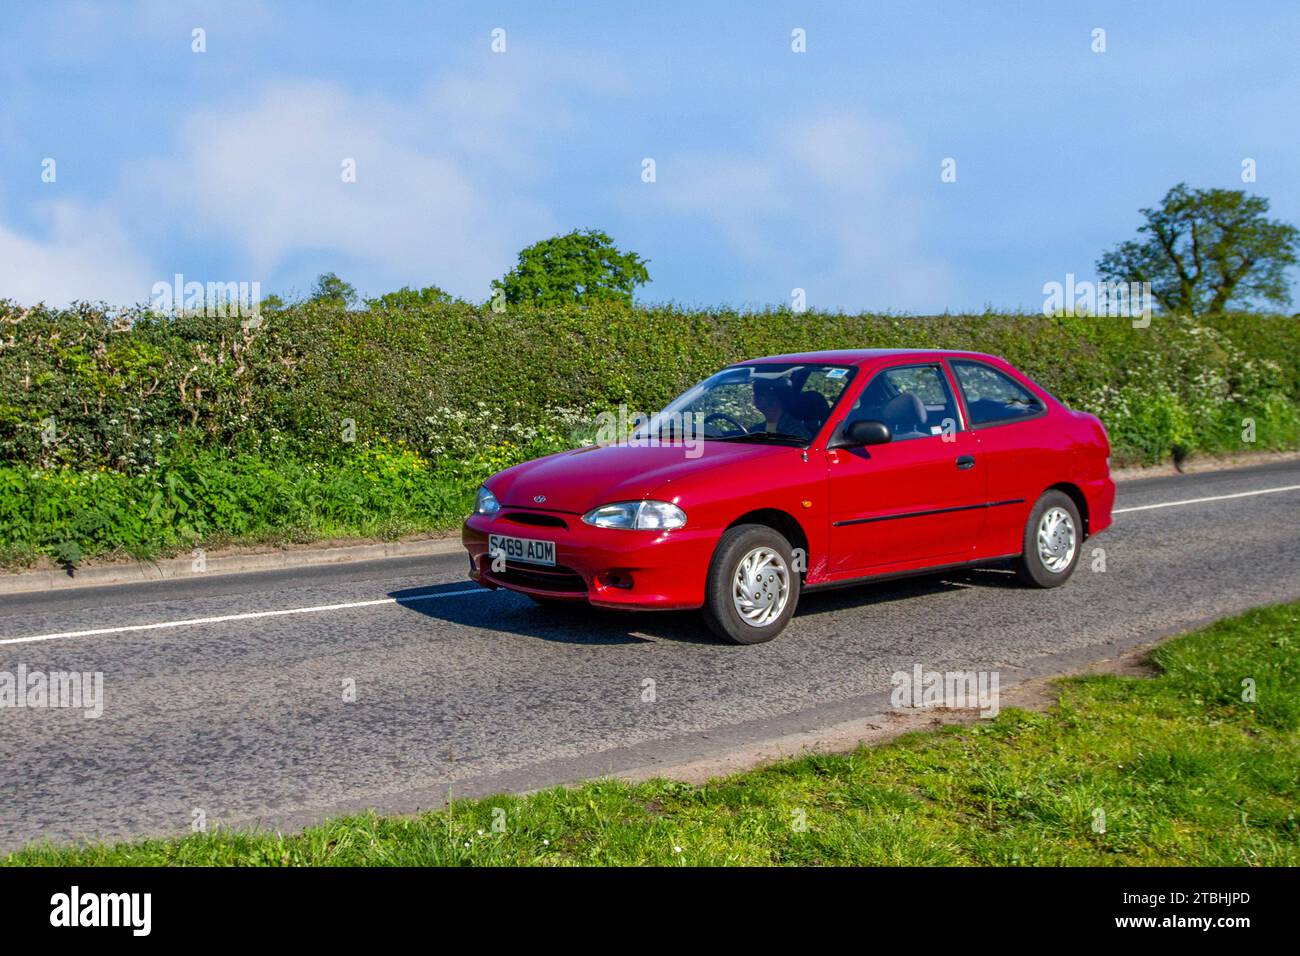 1998 90s nineties Hyundai Accent Coupe; Vintage, restored classic motors, automobile collectors motoring enthusiasts, historic veteran cars travelling in Cheshire, UK Stock Photo